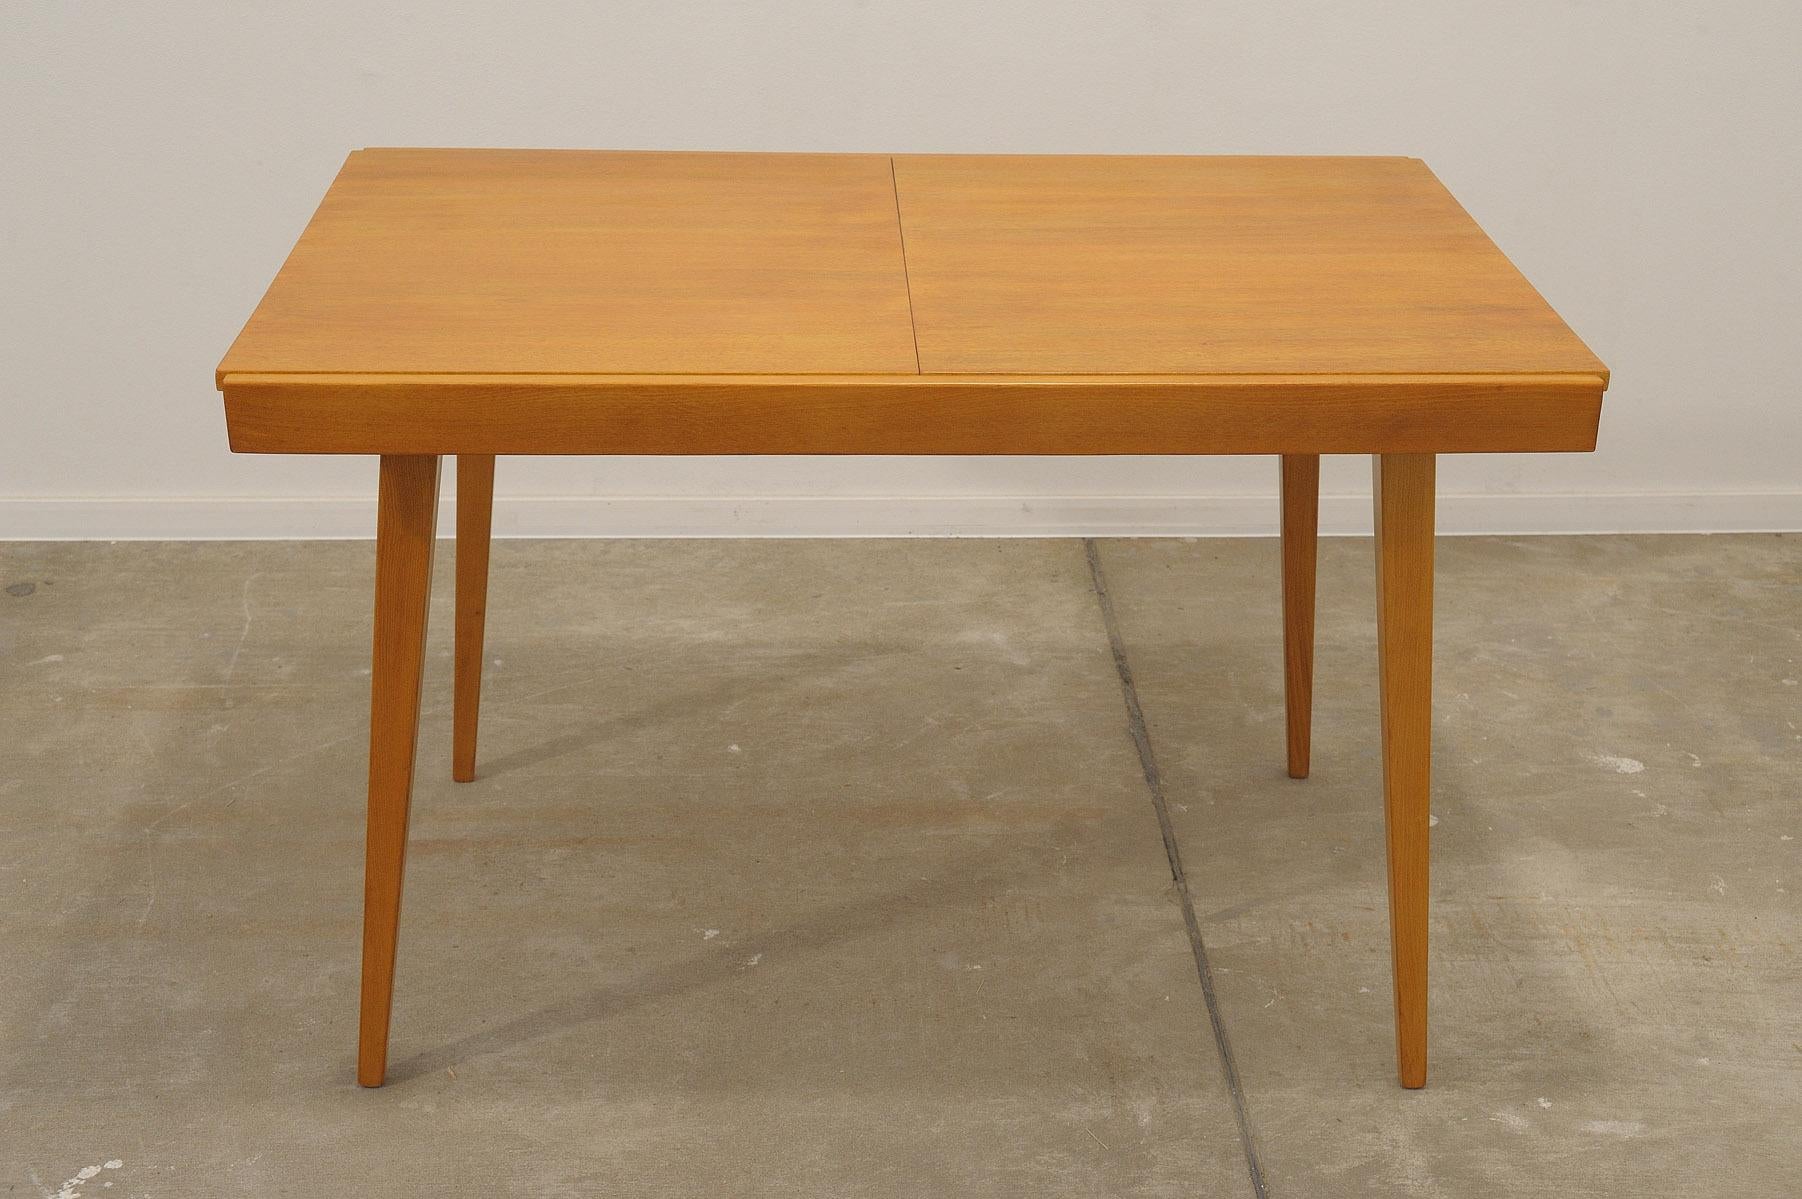 This midcentury adjustable dining table was designed by František Jirák for Tatra nábyto in the 1970´s and made in the former Czechoslovakia in the 1970´s.  It´s made of ash and beech wood.  The lenght is adjustable from 120 cm to 180 cm. The table